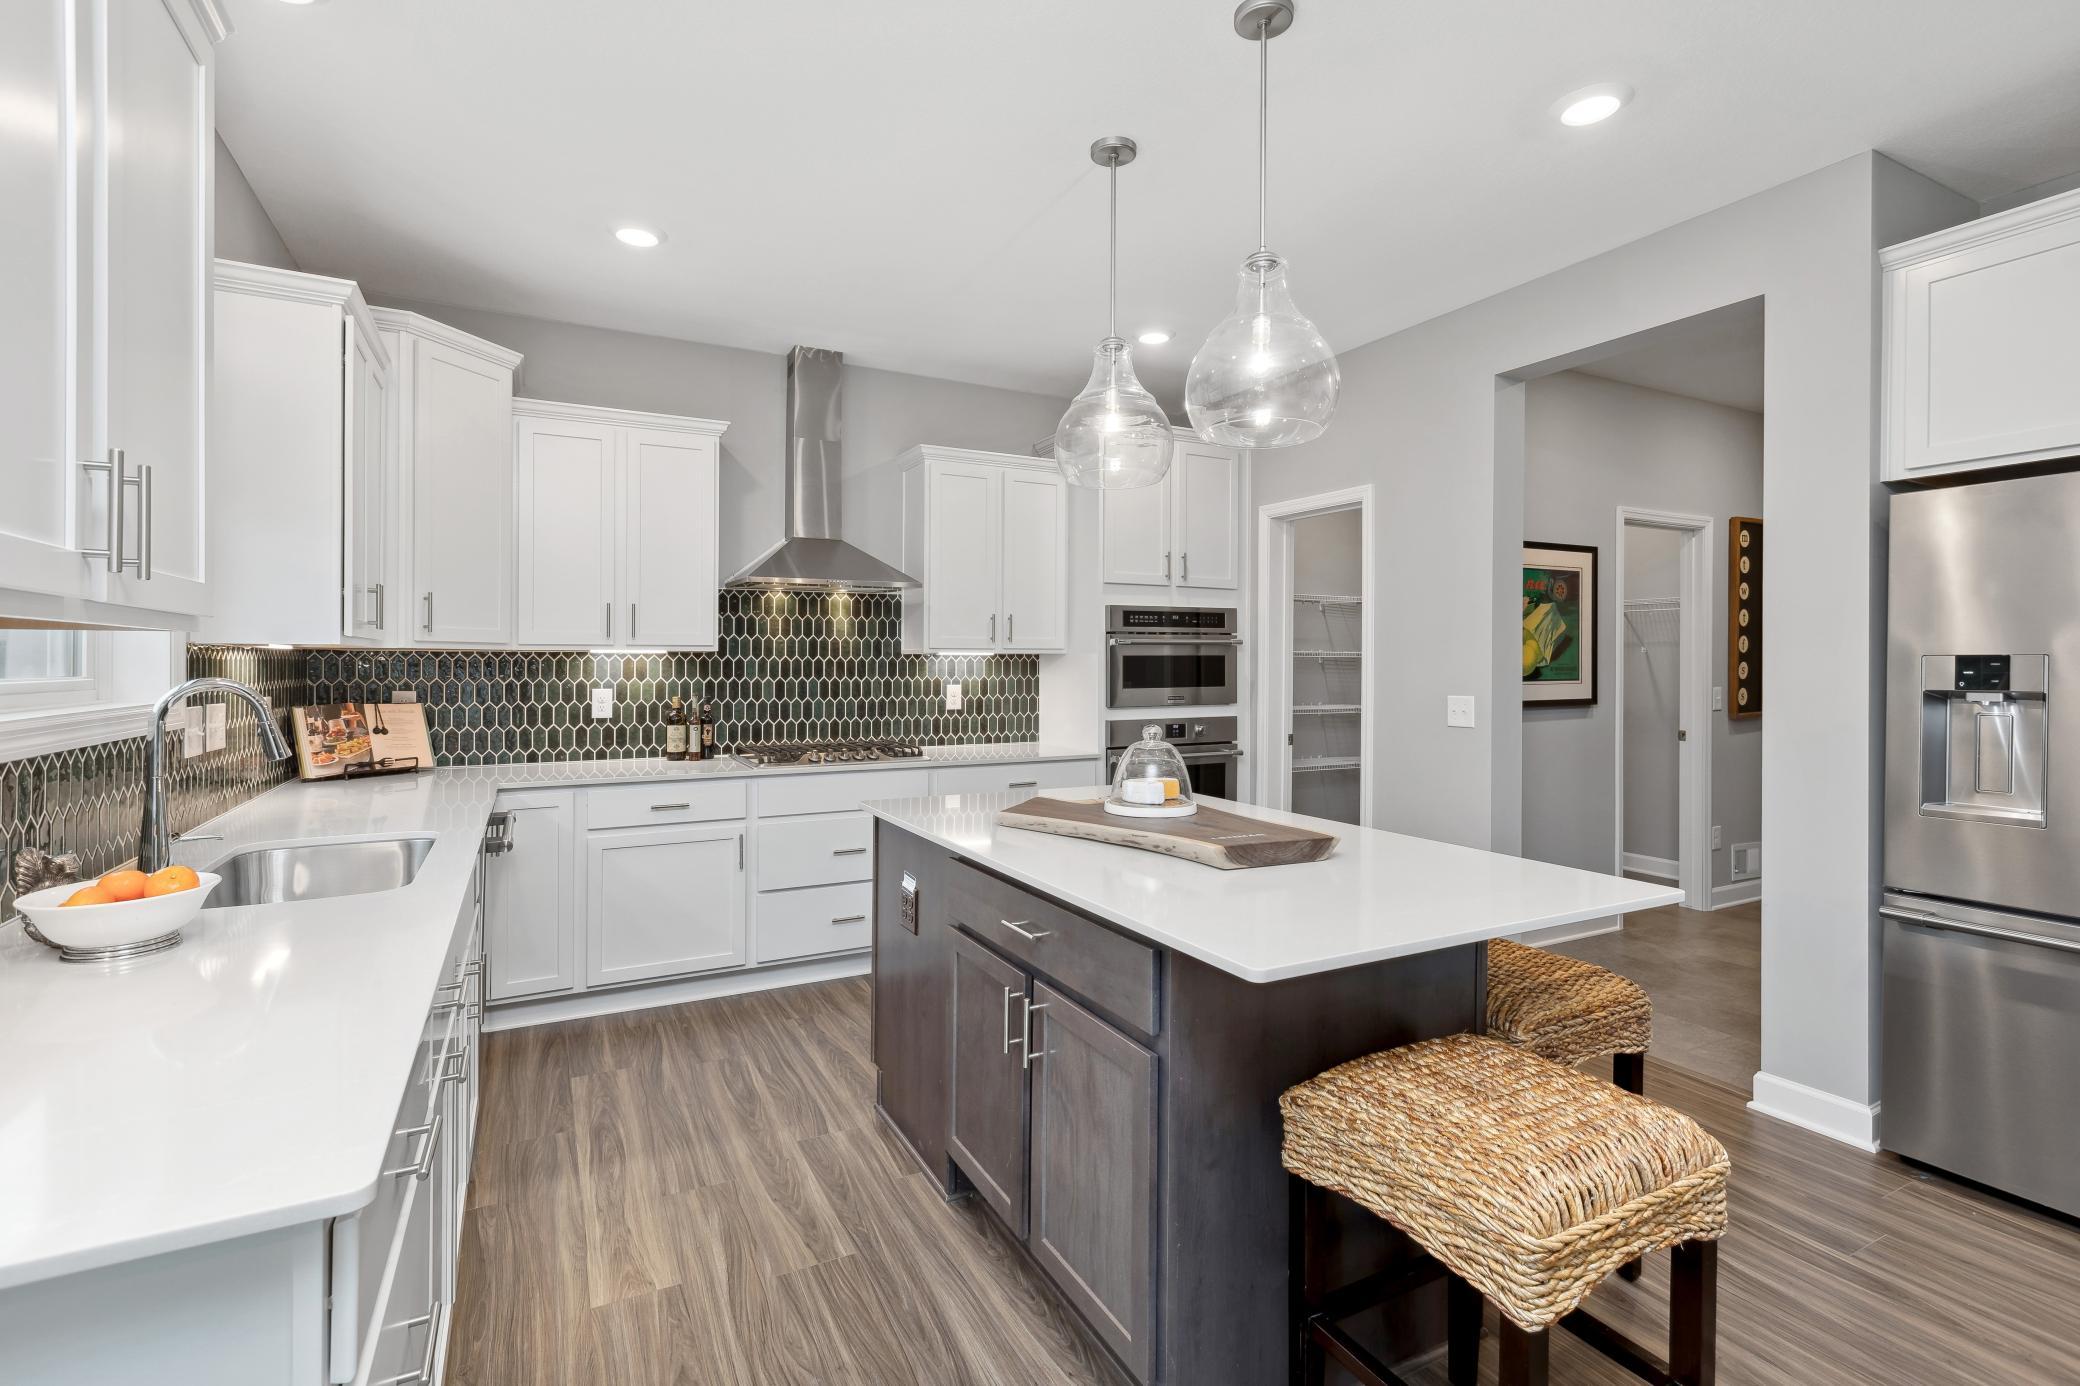 (Photo of decorated model, actual homes finishes will vary) Welcome to the Lewis! Stunning kitchen with ample space and brand new stainless steel appliances!